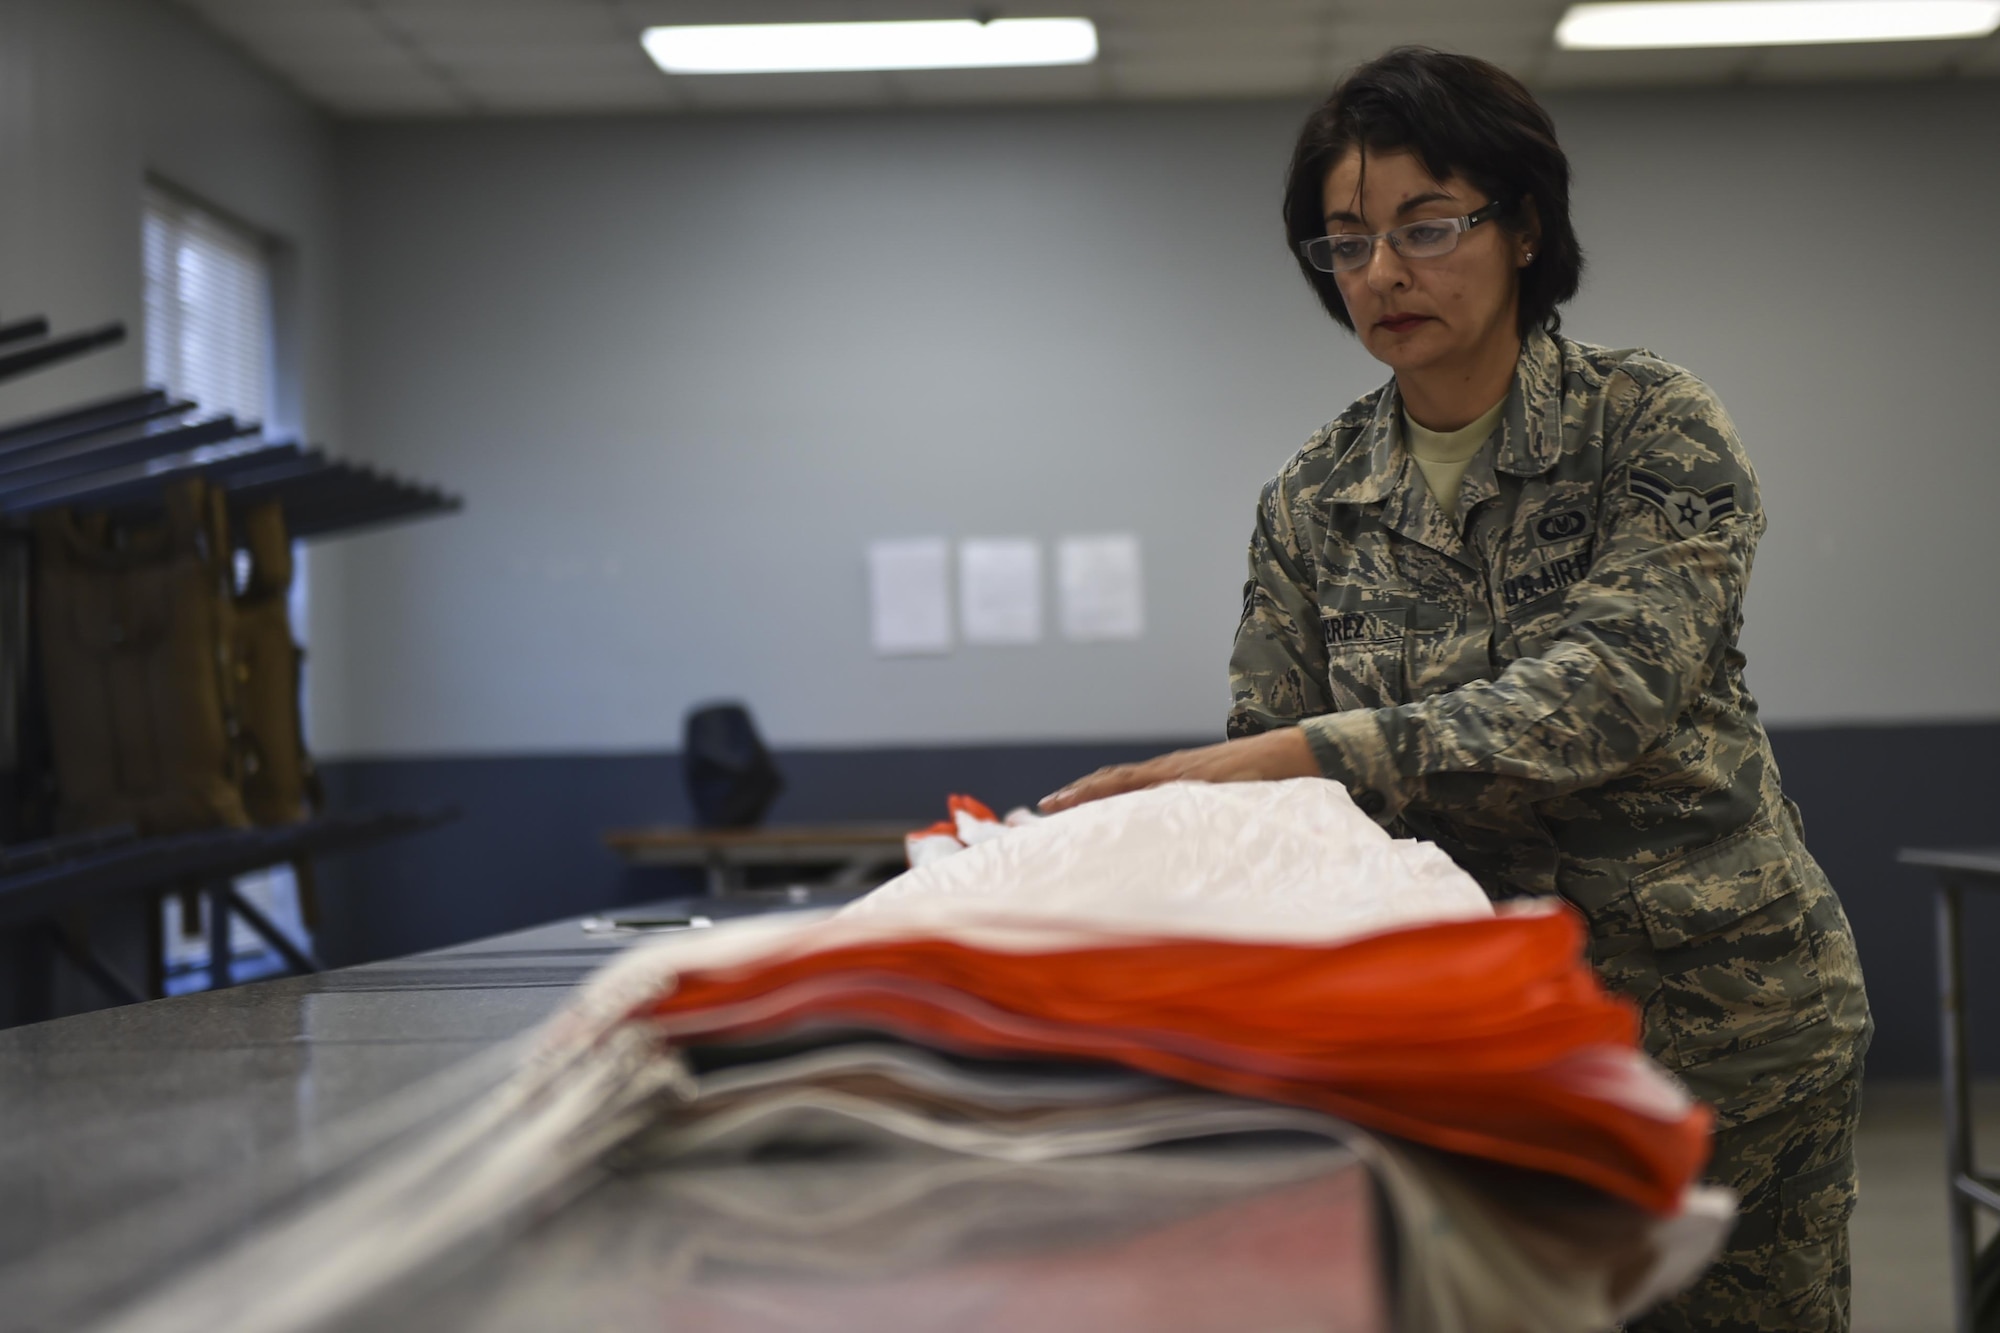 Airman 1st Class Maria Perez, an aircrew flight equipment specialist with the 4th Special Operations Squadron, checks the lines of a low-profile parachute at Hurlburt Field, Fla., Jan. 25, 2017. The equipment specialists are responsible for maintaining flight equipment such as helmets, oxygen masks, harnesses and all life-saving equipment. (U.S. Air Force photo by Airman 1st Class Joseph Pick)